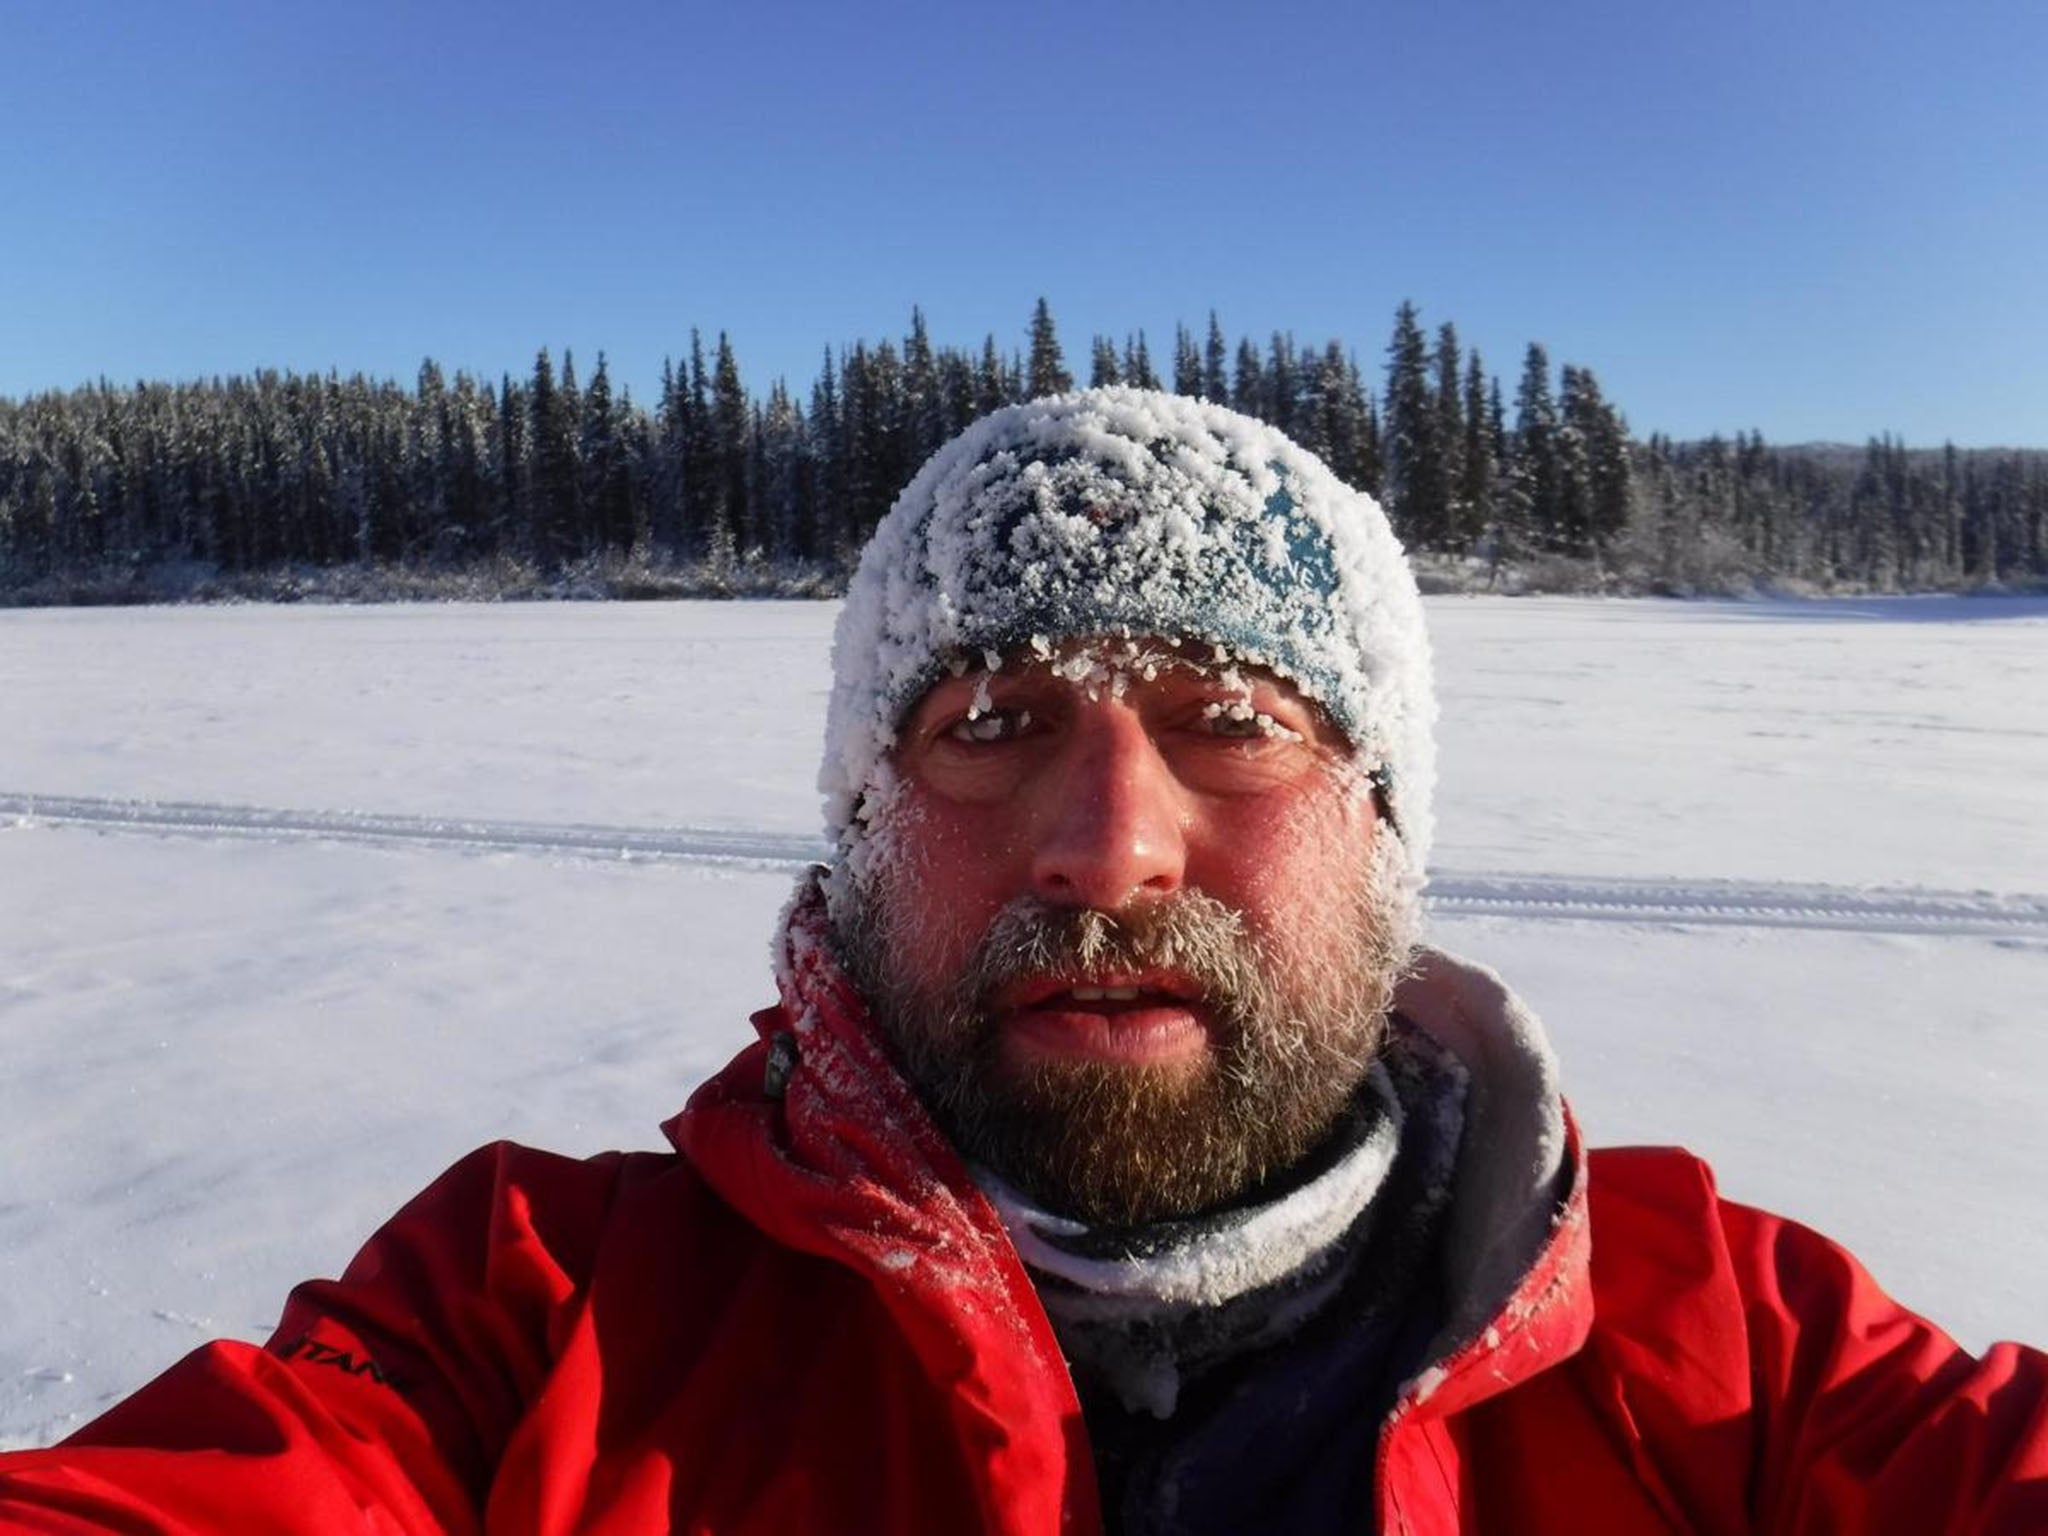 Nick Griffiths, 46, was forced to drop out of the Yukon Arctic race after suffering from severe frostbite